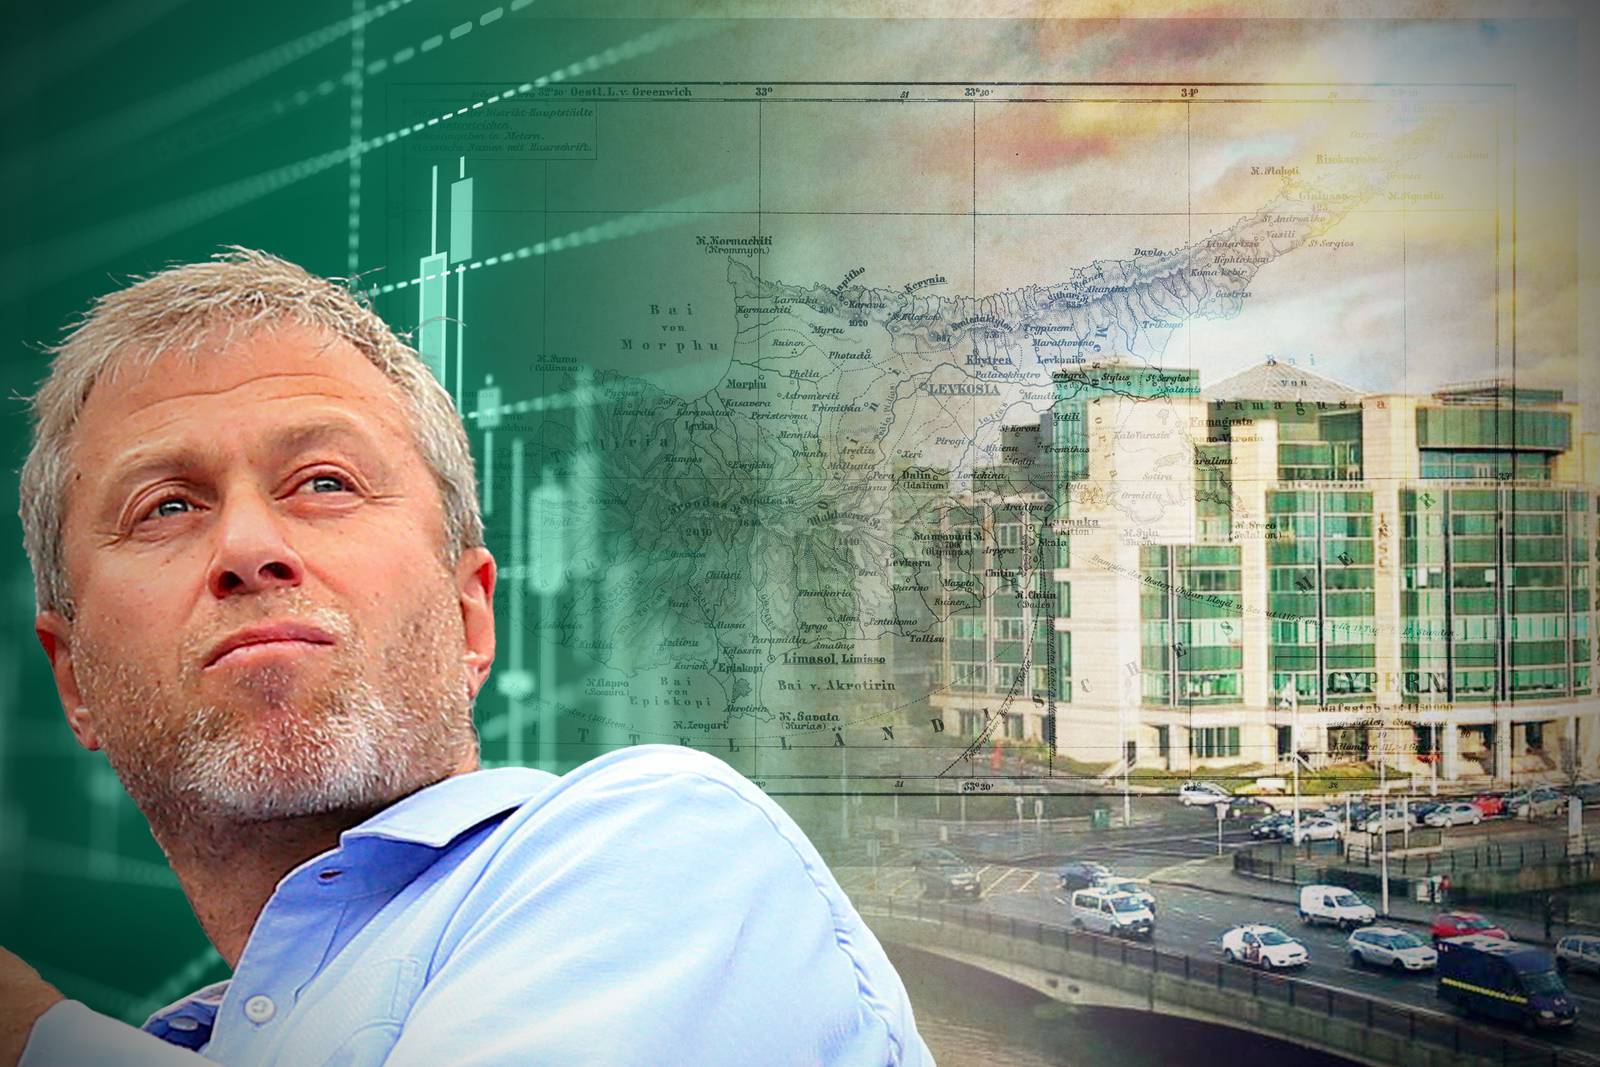 Roman Abramovich had substantial investments in Irish hedge funds